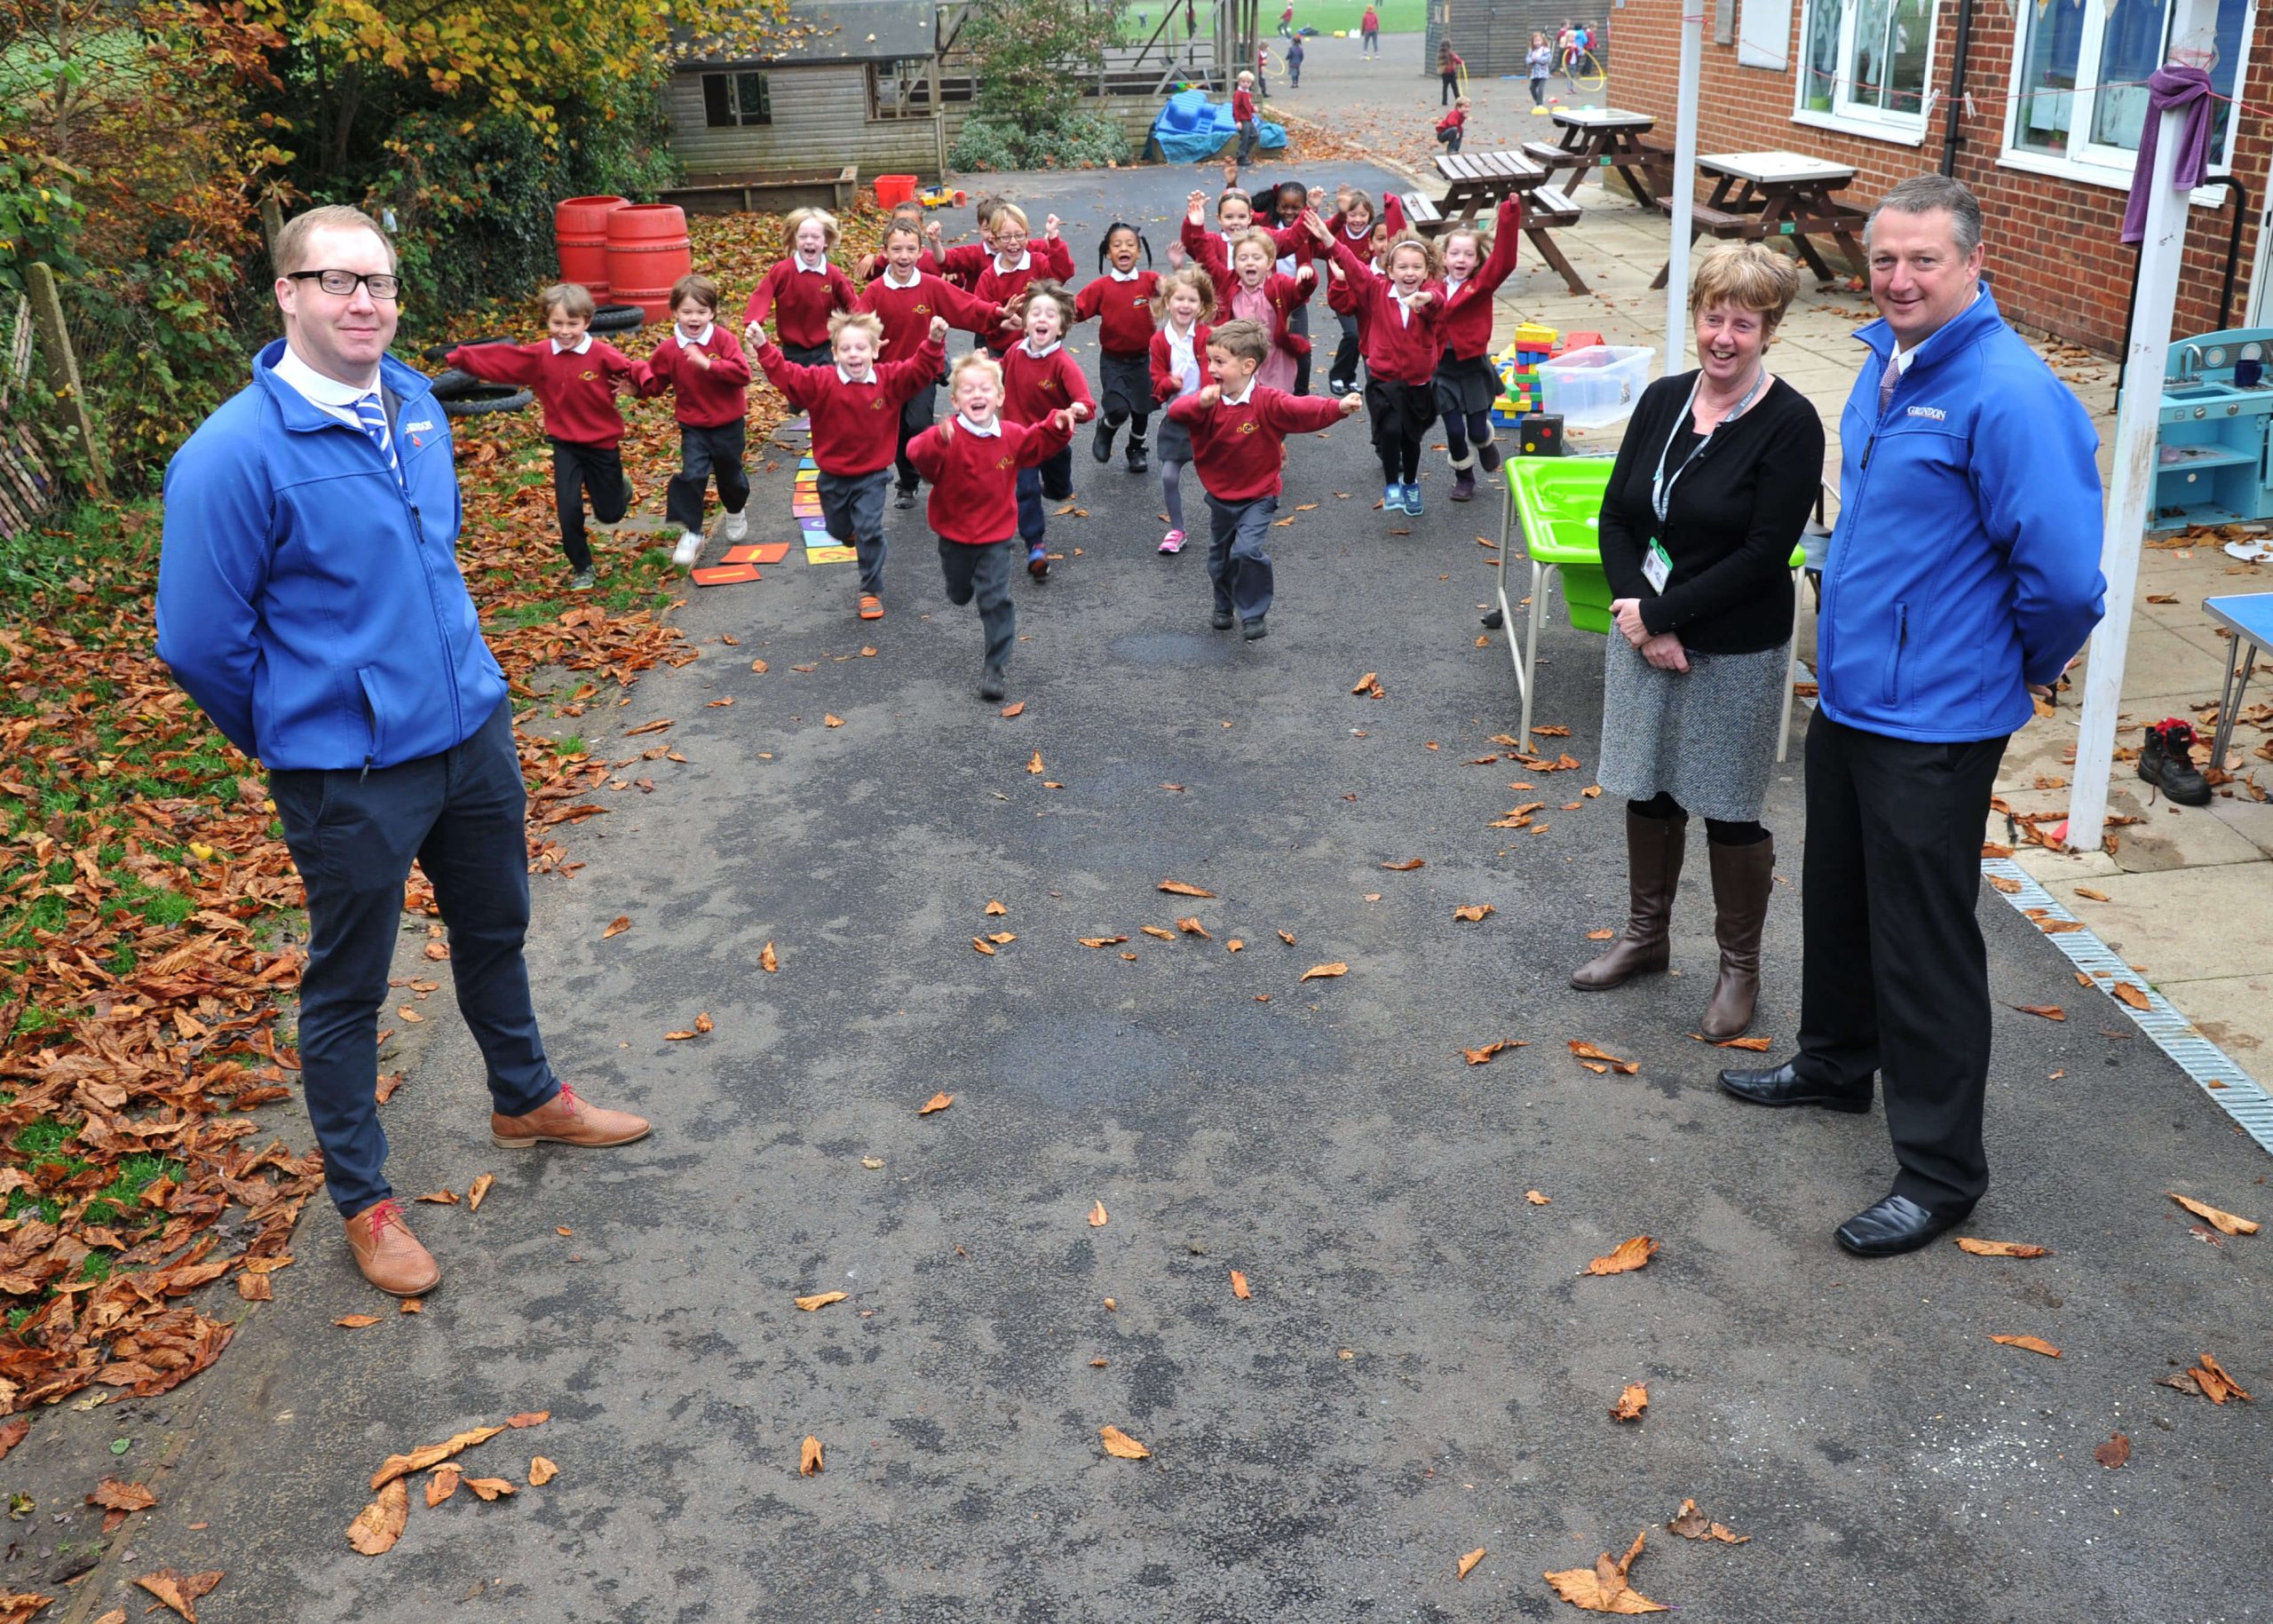 Pupils at the school having fun on the new play and learning area, watched by Jamie Brooks (left), regional materials recovery facility manager for Grundon, whose children attend the school, together with headteacher Heather Haigh and Andy Bright, deputy aggregates manager, Grundon Sand &amp; Gravel.